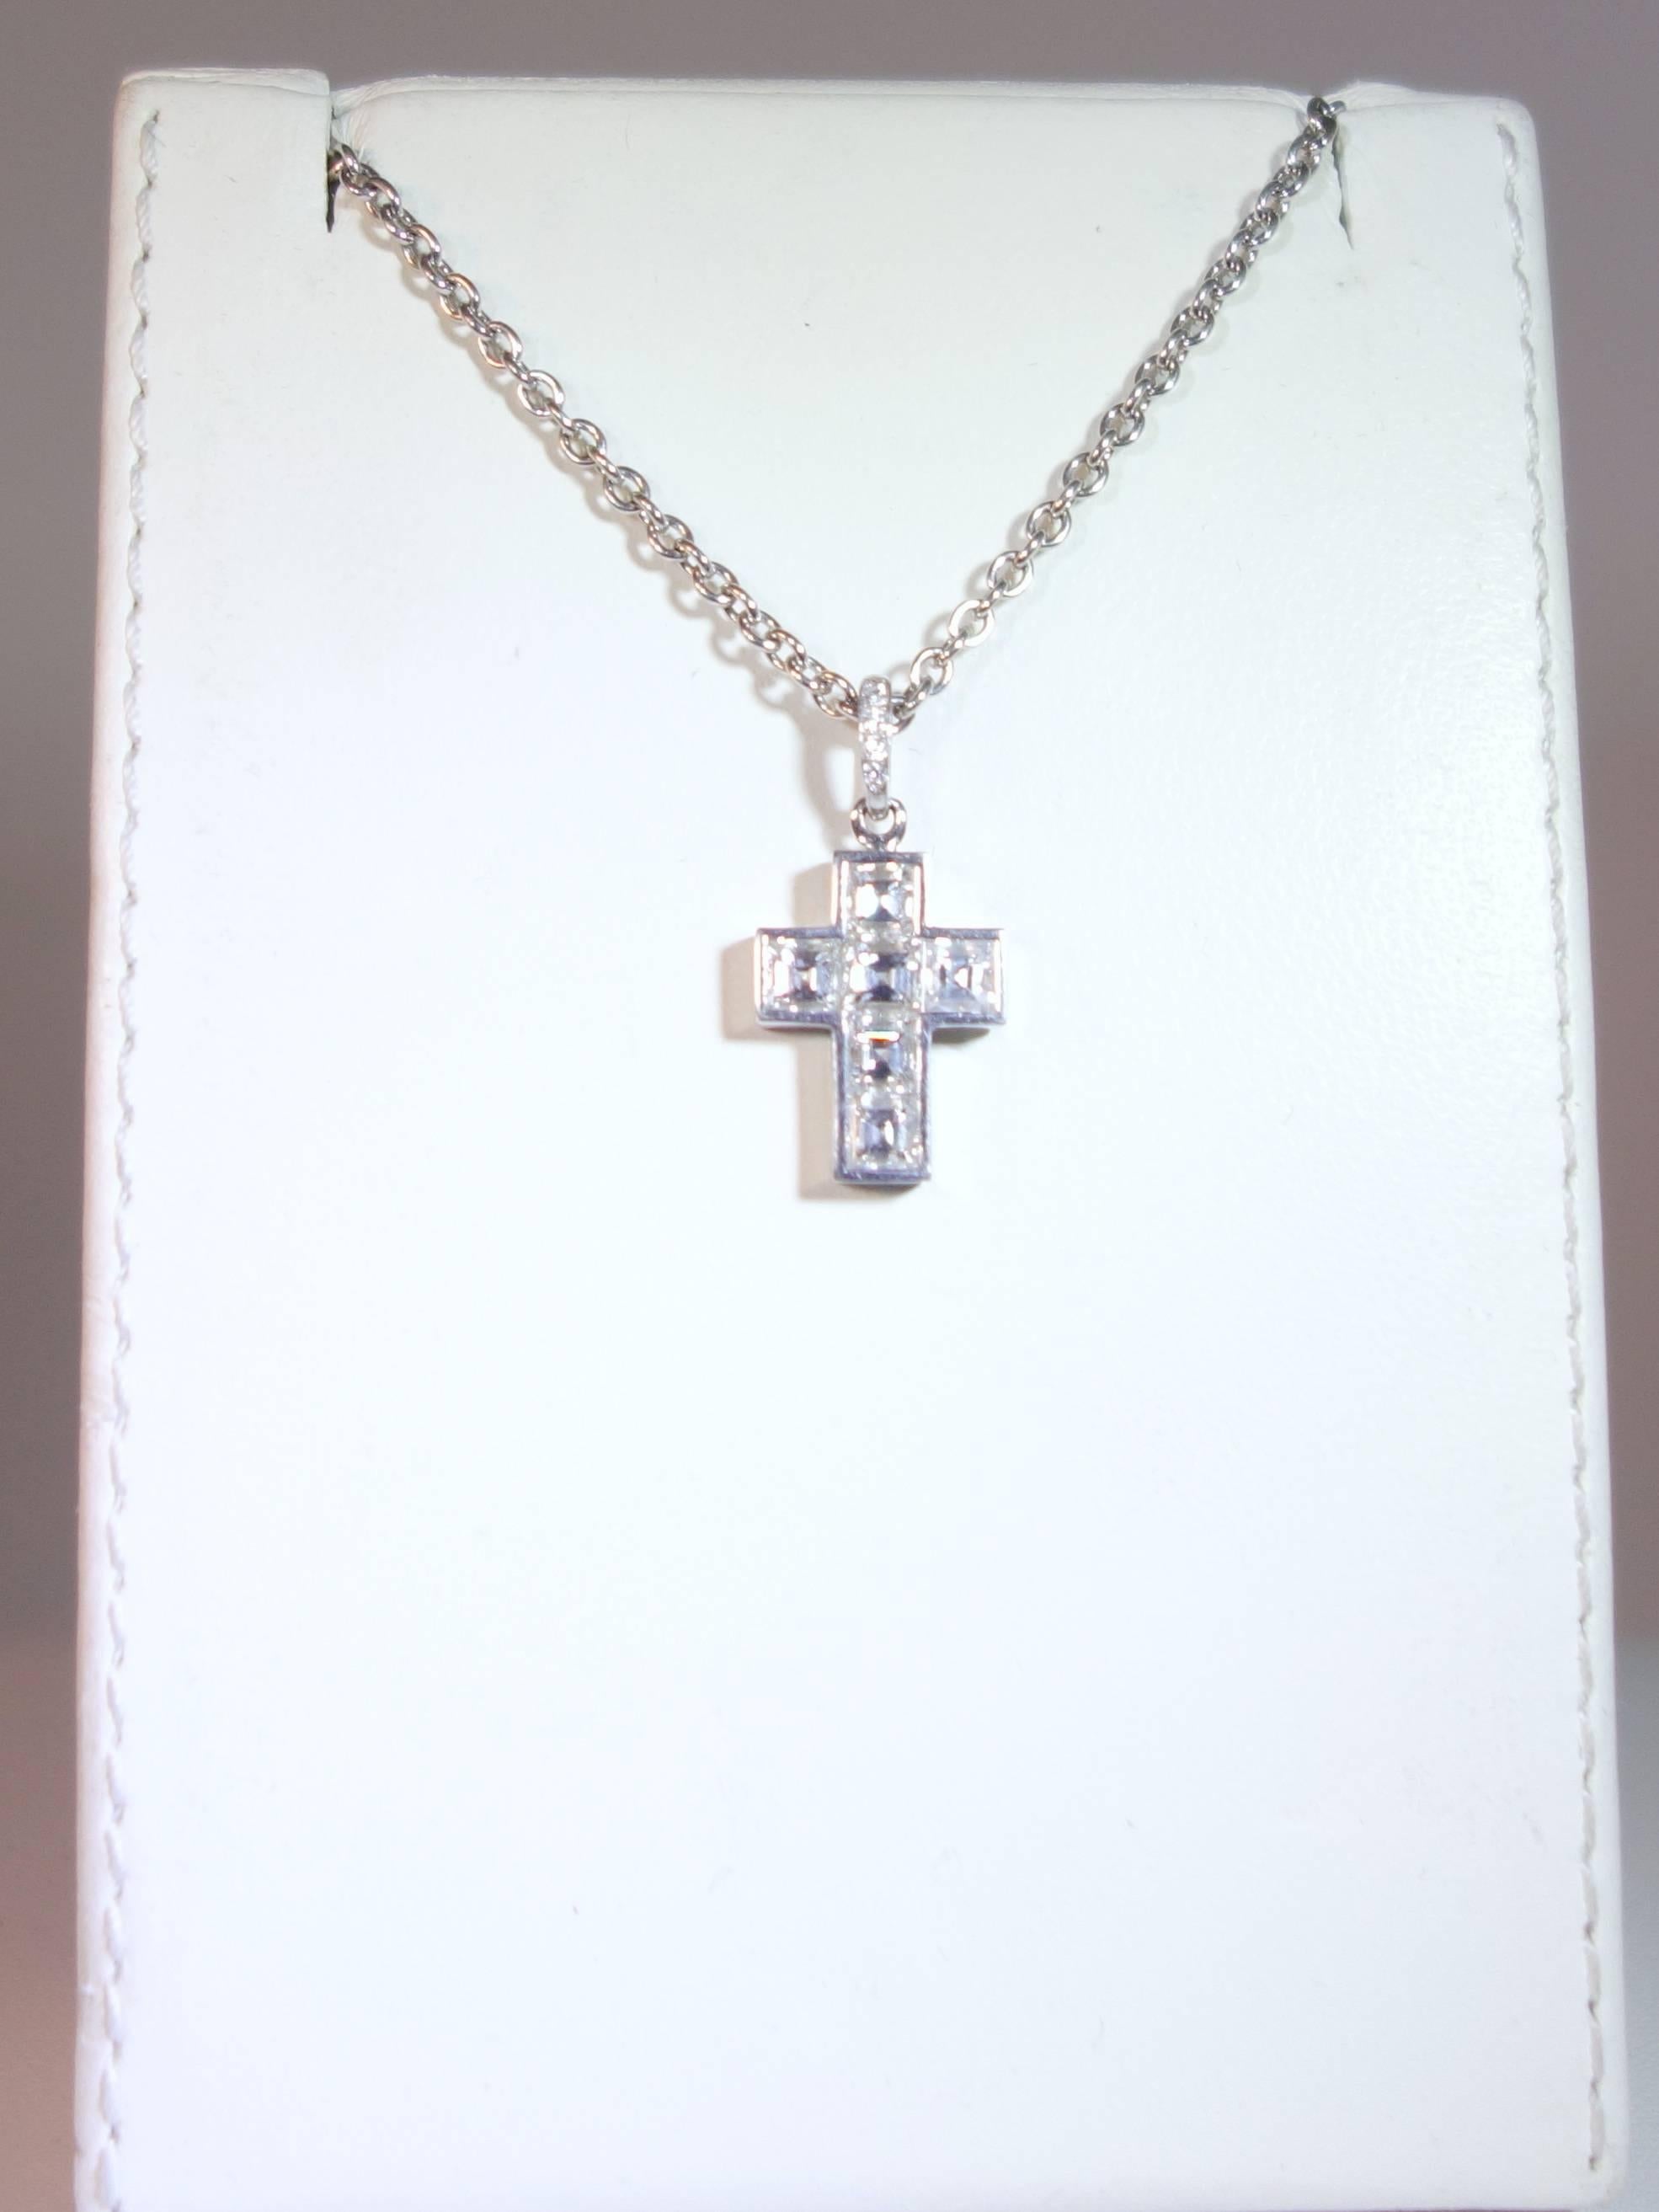 Six square cut fine diamonds all well matched and approx. (F) colorless and (VVS) very very slightly included.  Both the pendant and the chain are signed Cartier and numbered 868034.  